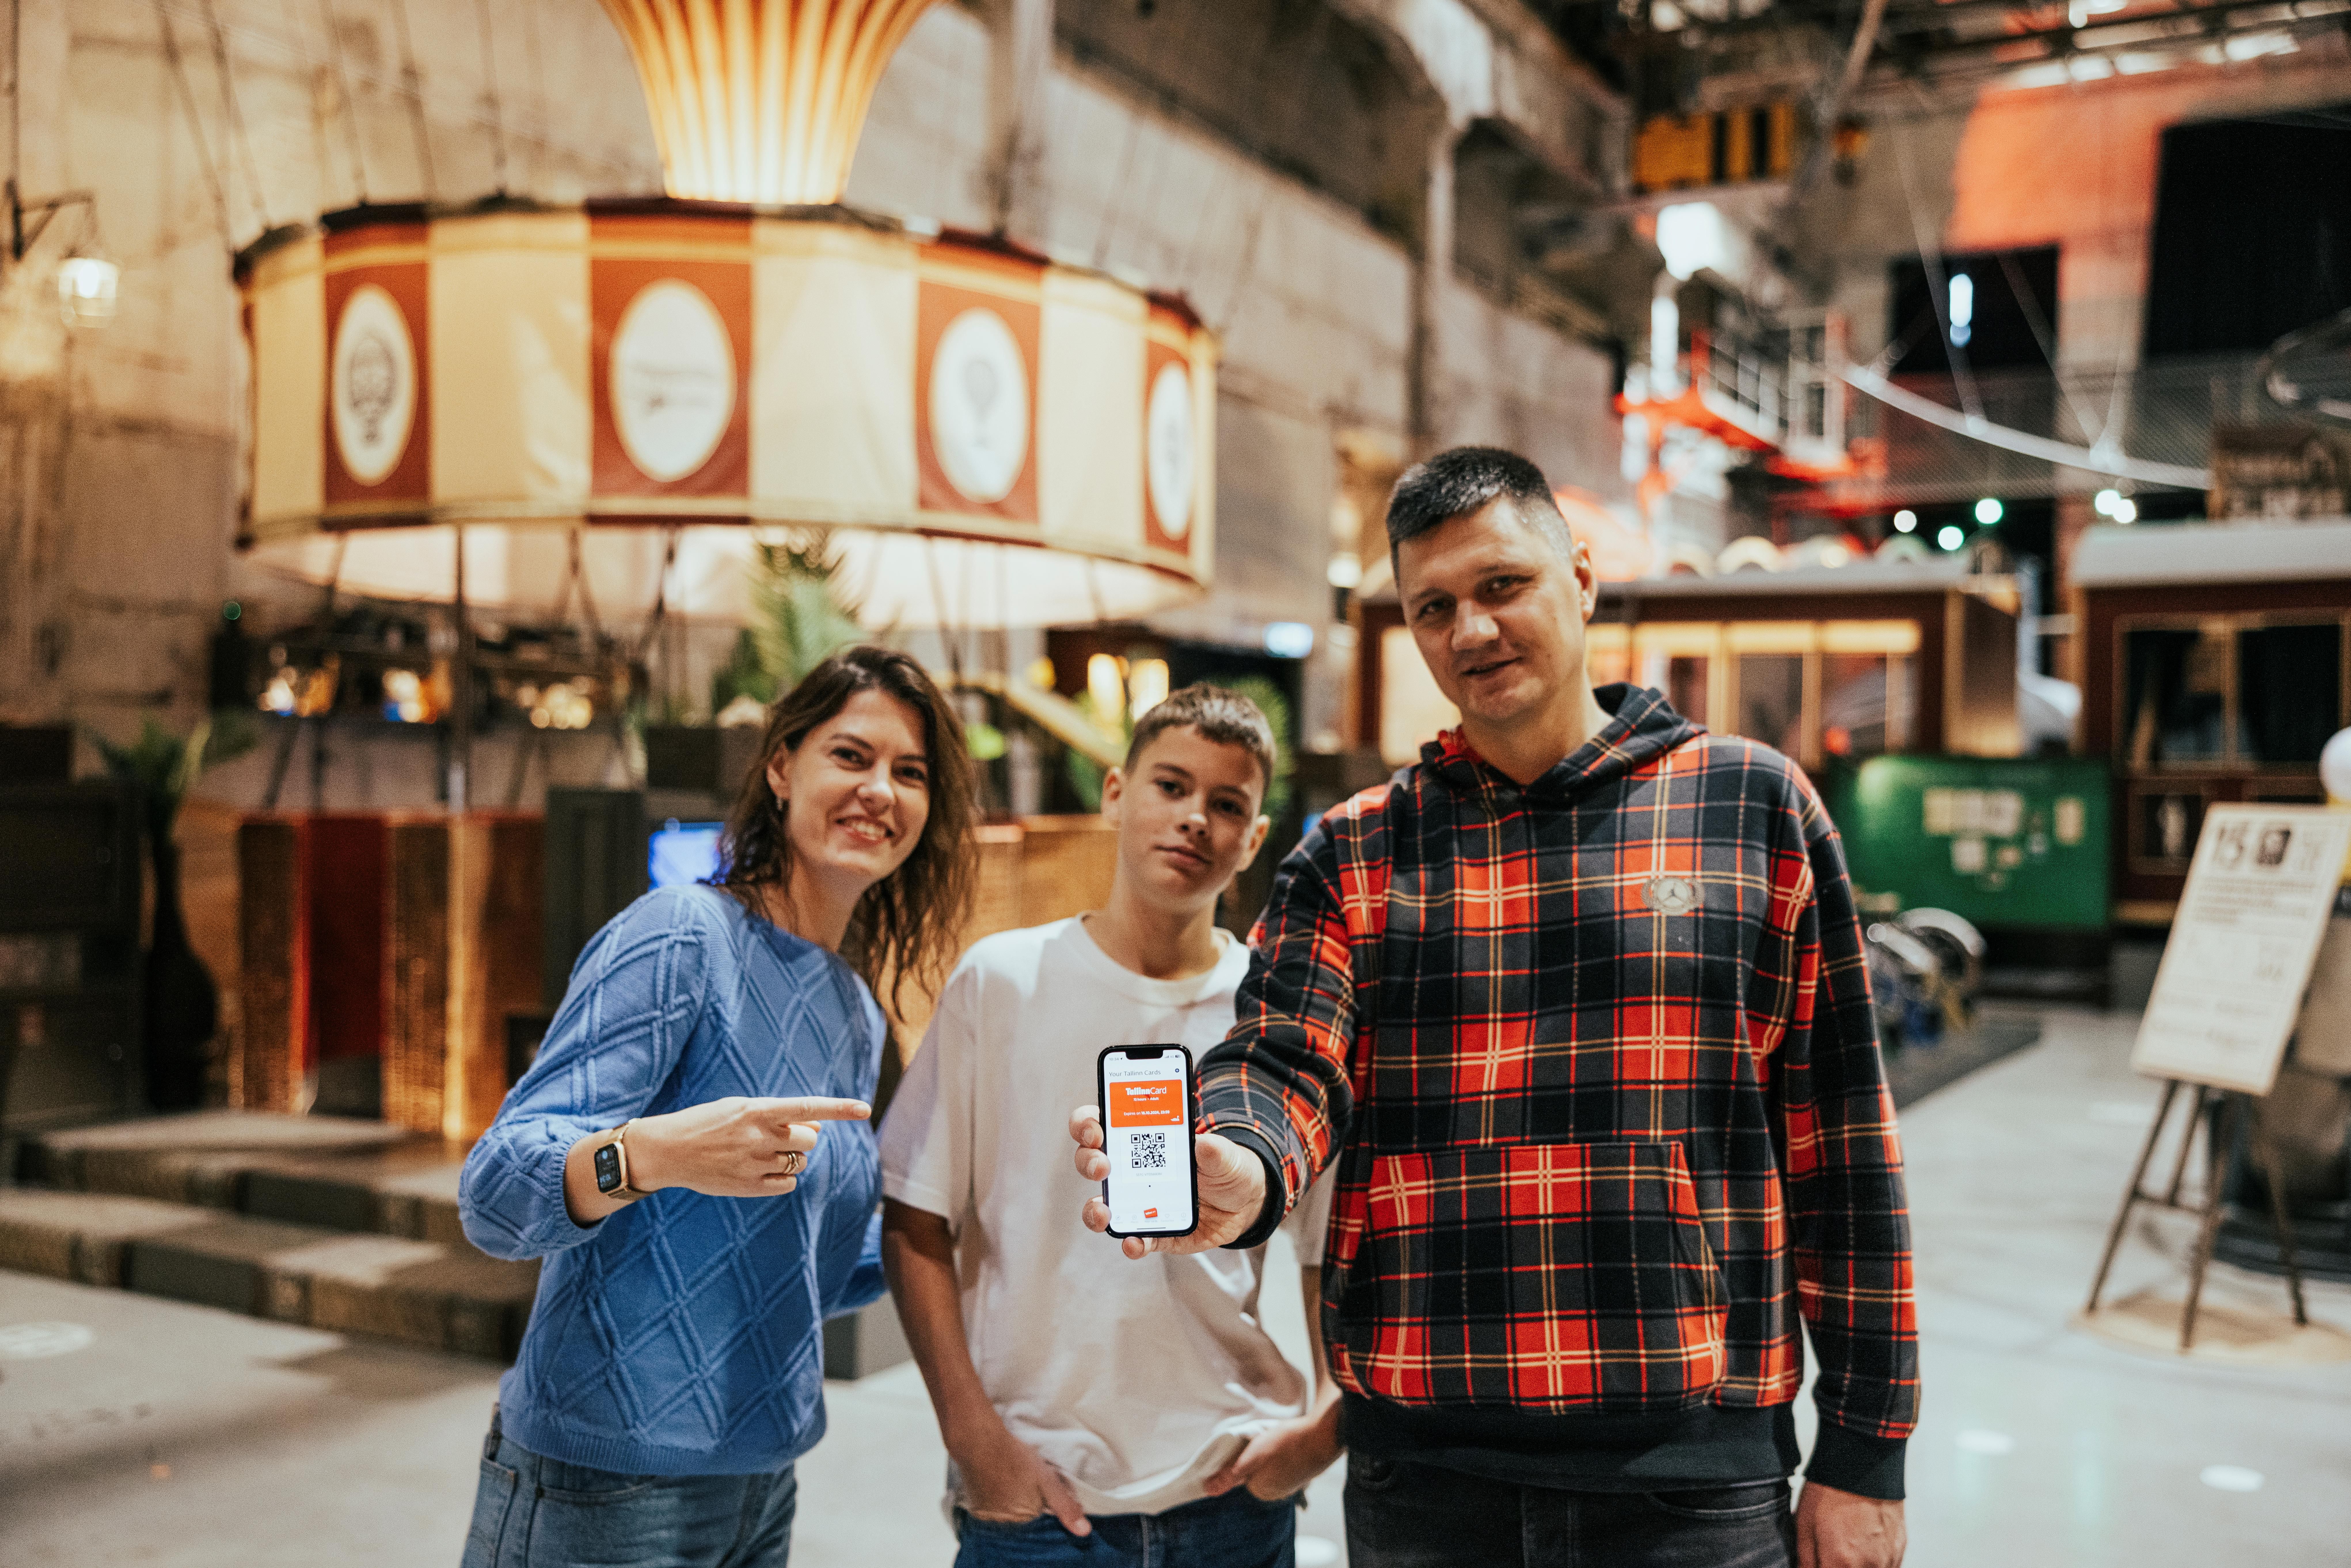 A family of three in the Proto Invention Factory in the Noblessner district in Tallinn; the mother pointing at the Tallinn Card app on her phone.